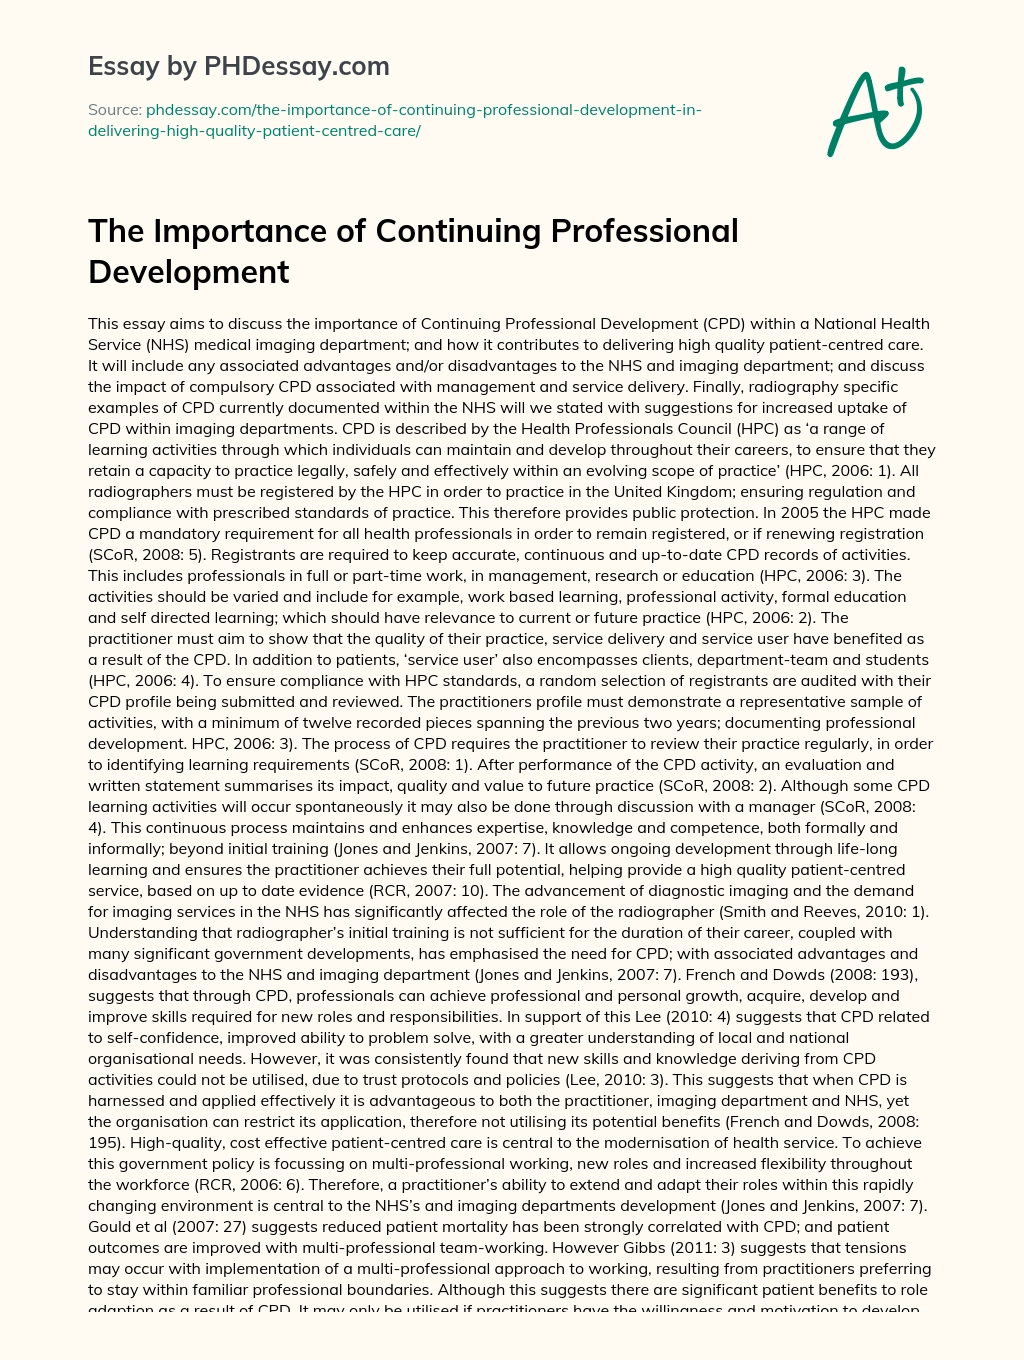 The Importance of Continuing Professional Development essay